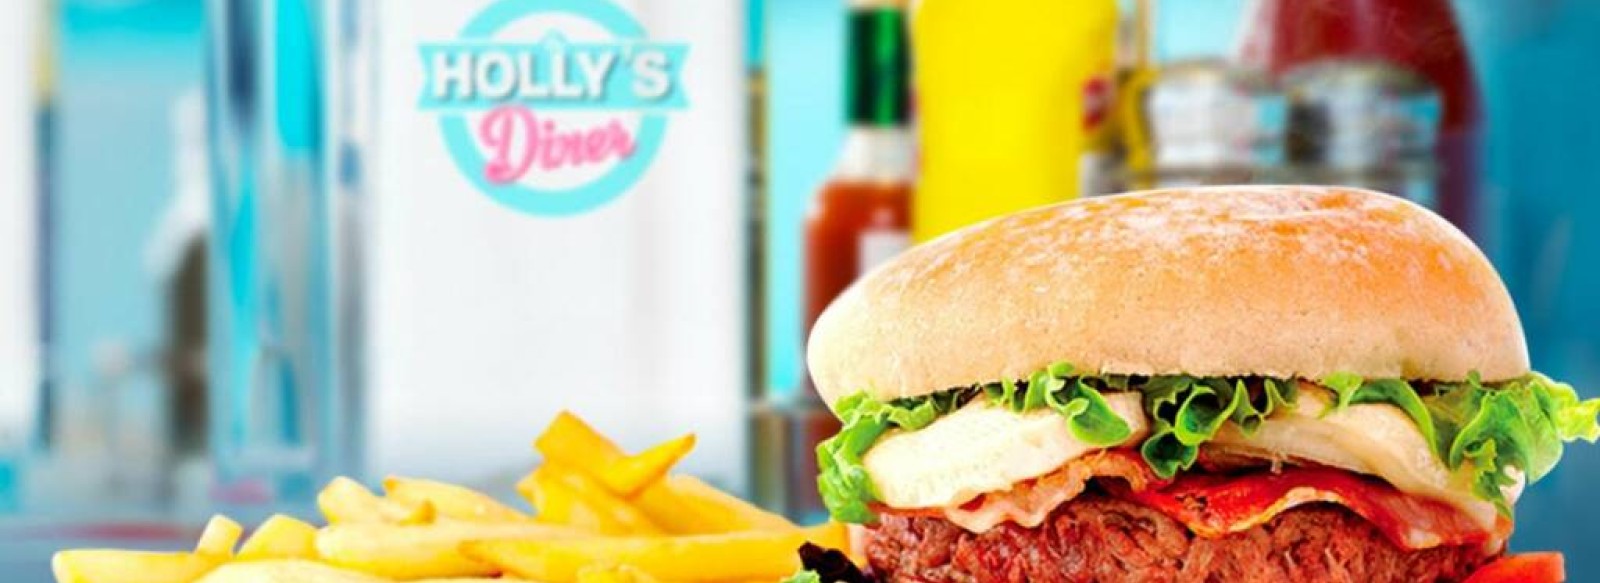 HOLLY'S DINER ANGERS